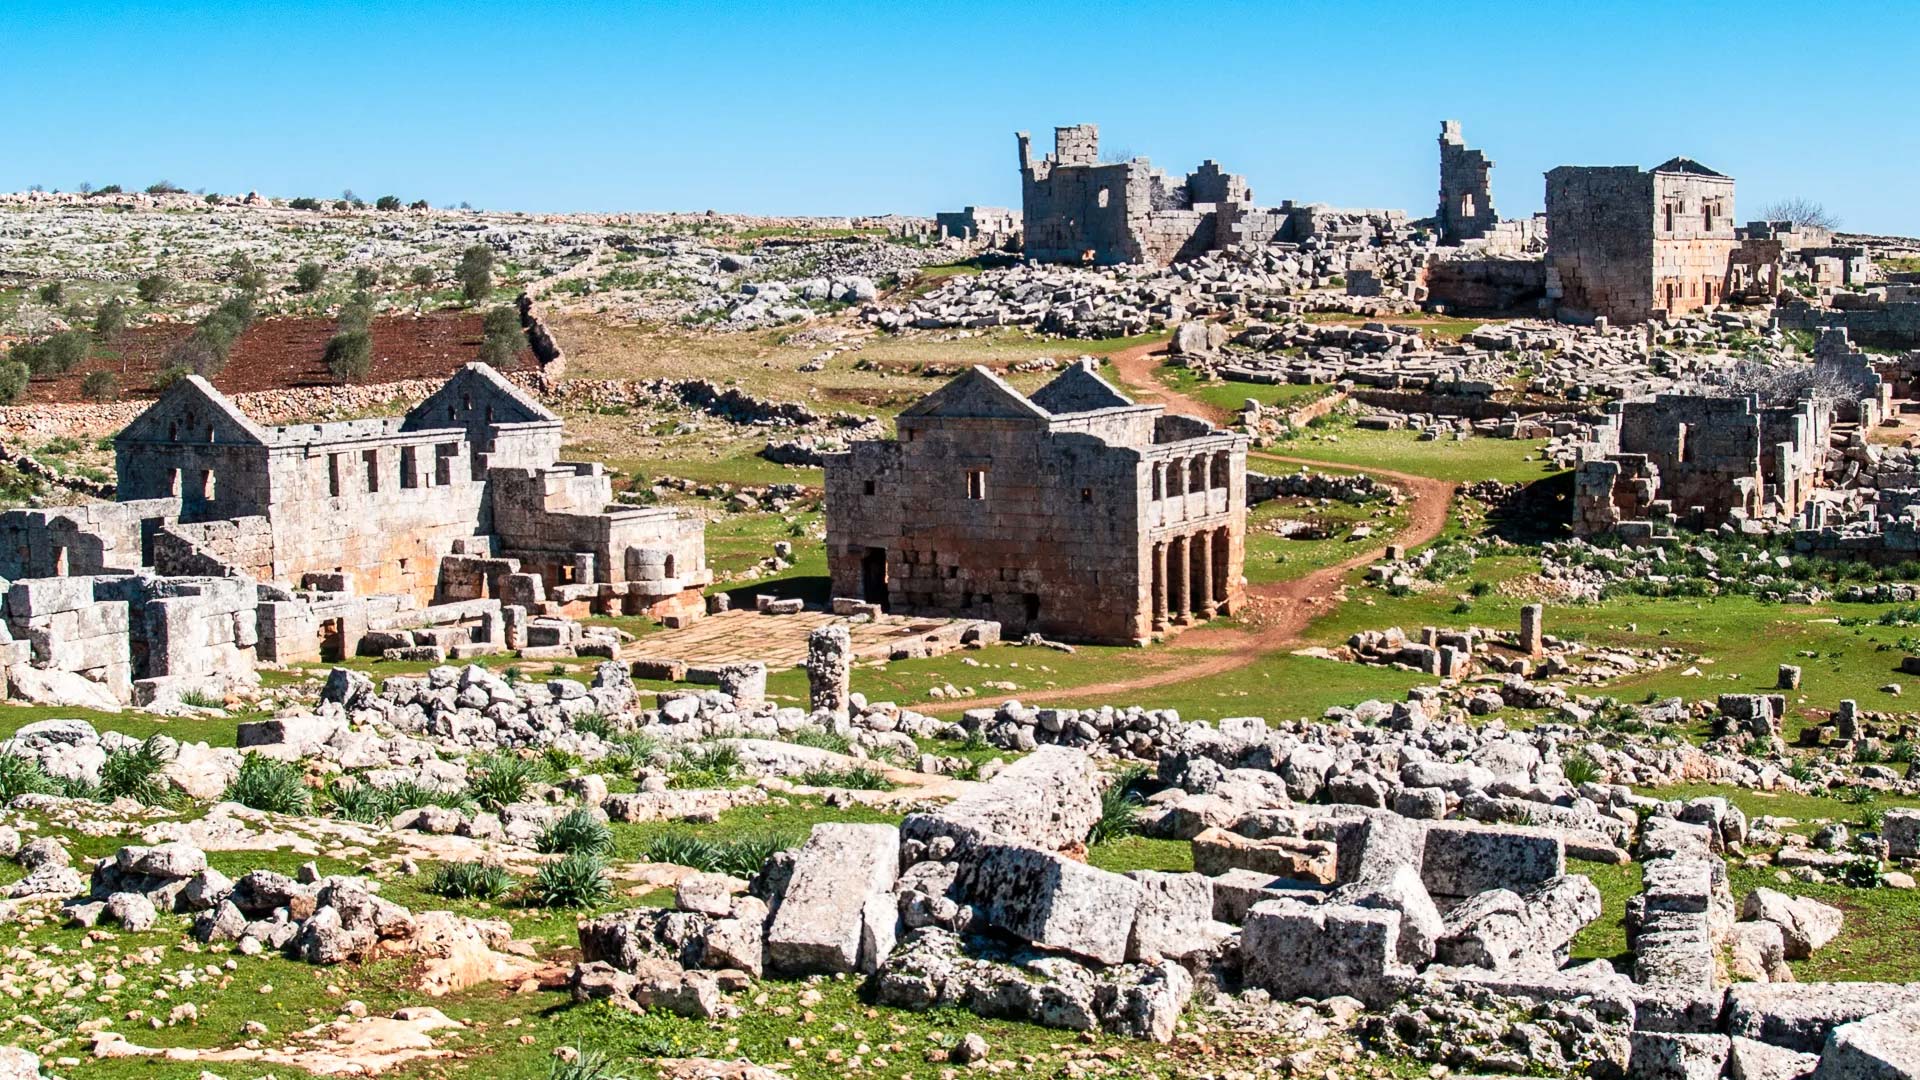 A panoramic photograph captures the sprawling ruins of Serjilla, an archaeological site that encompasses extensive remnants of a fully preserved Byzantine settlement.